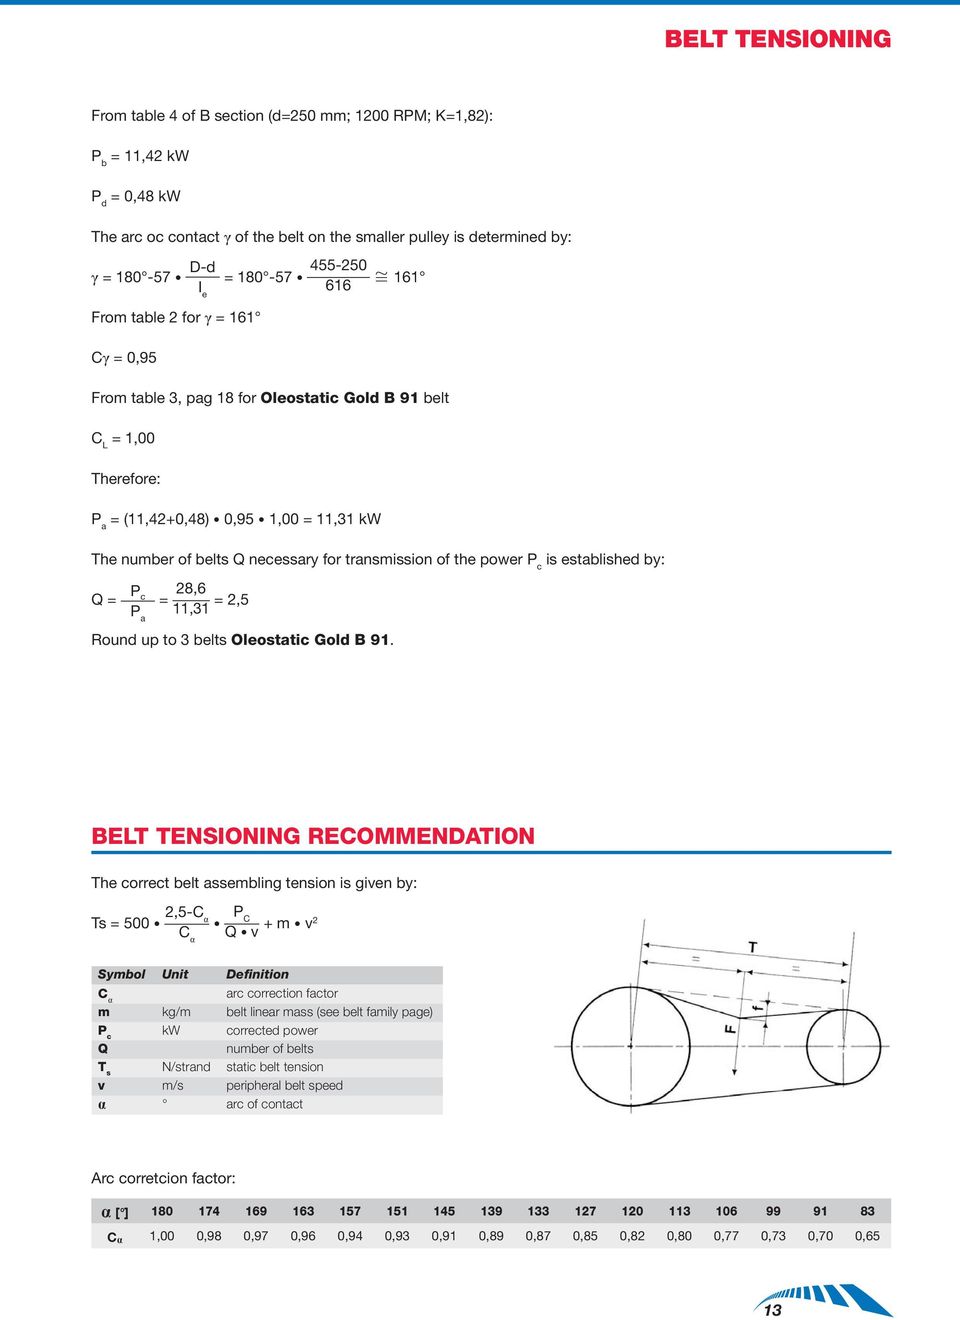 transmission of the power P c is established by: P Q = c = 28,6 P 11,31 = 2,5 a Round up to 3 belts Oleostatic Gold B 91.